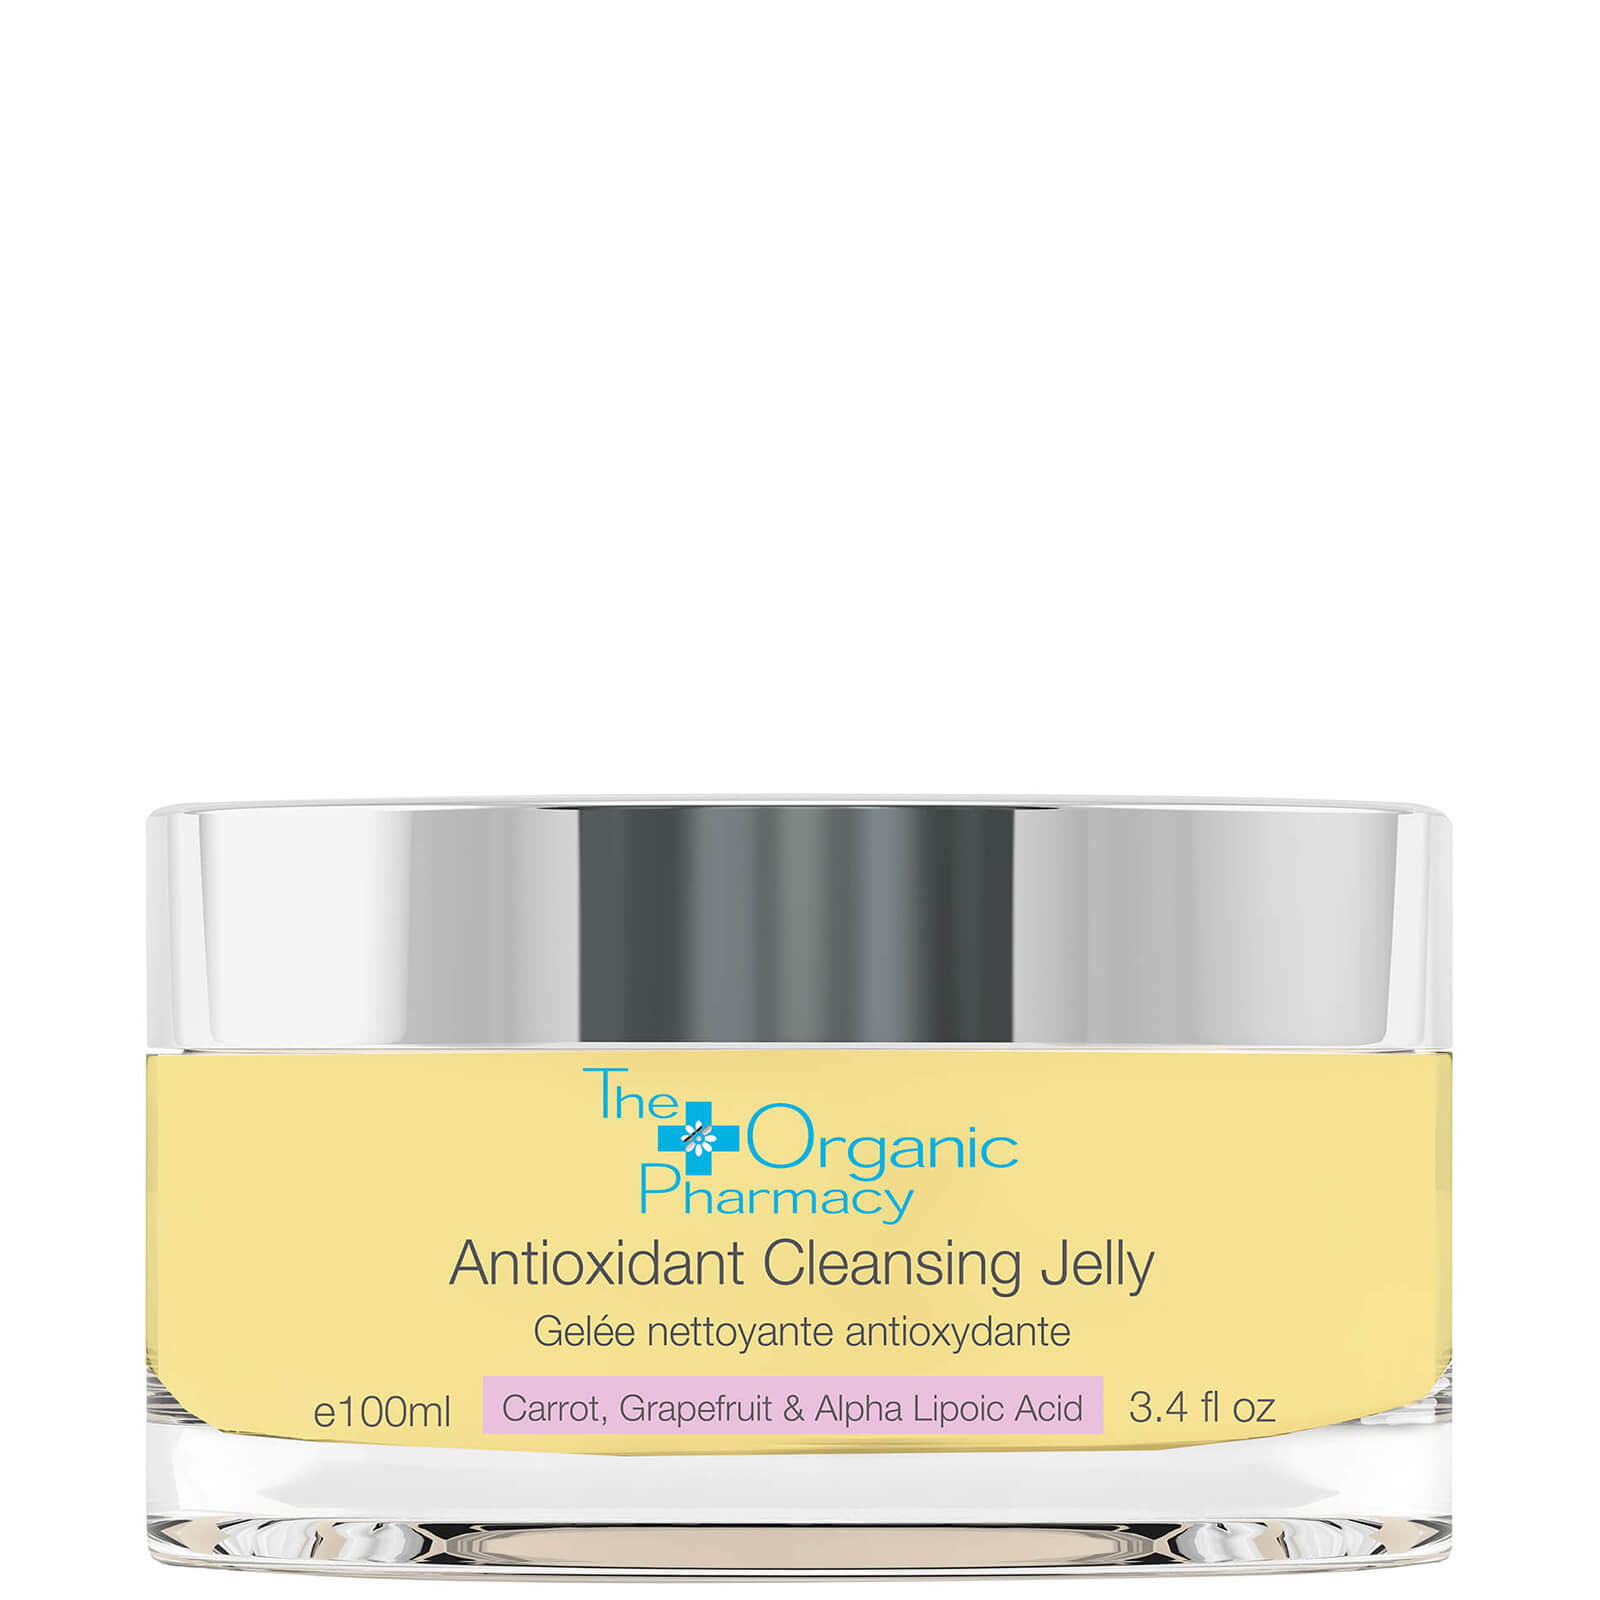 Image of The Organic Pharmacy Antioxidant Cleansing Jelly 100ml